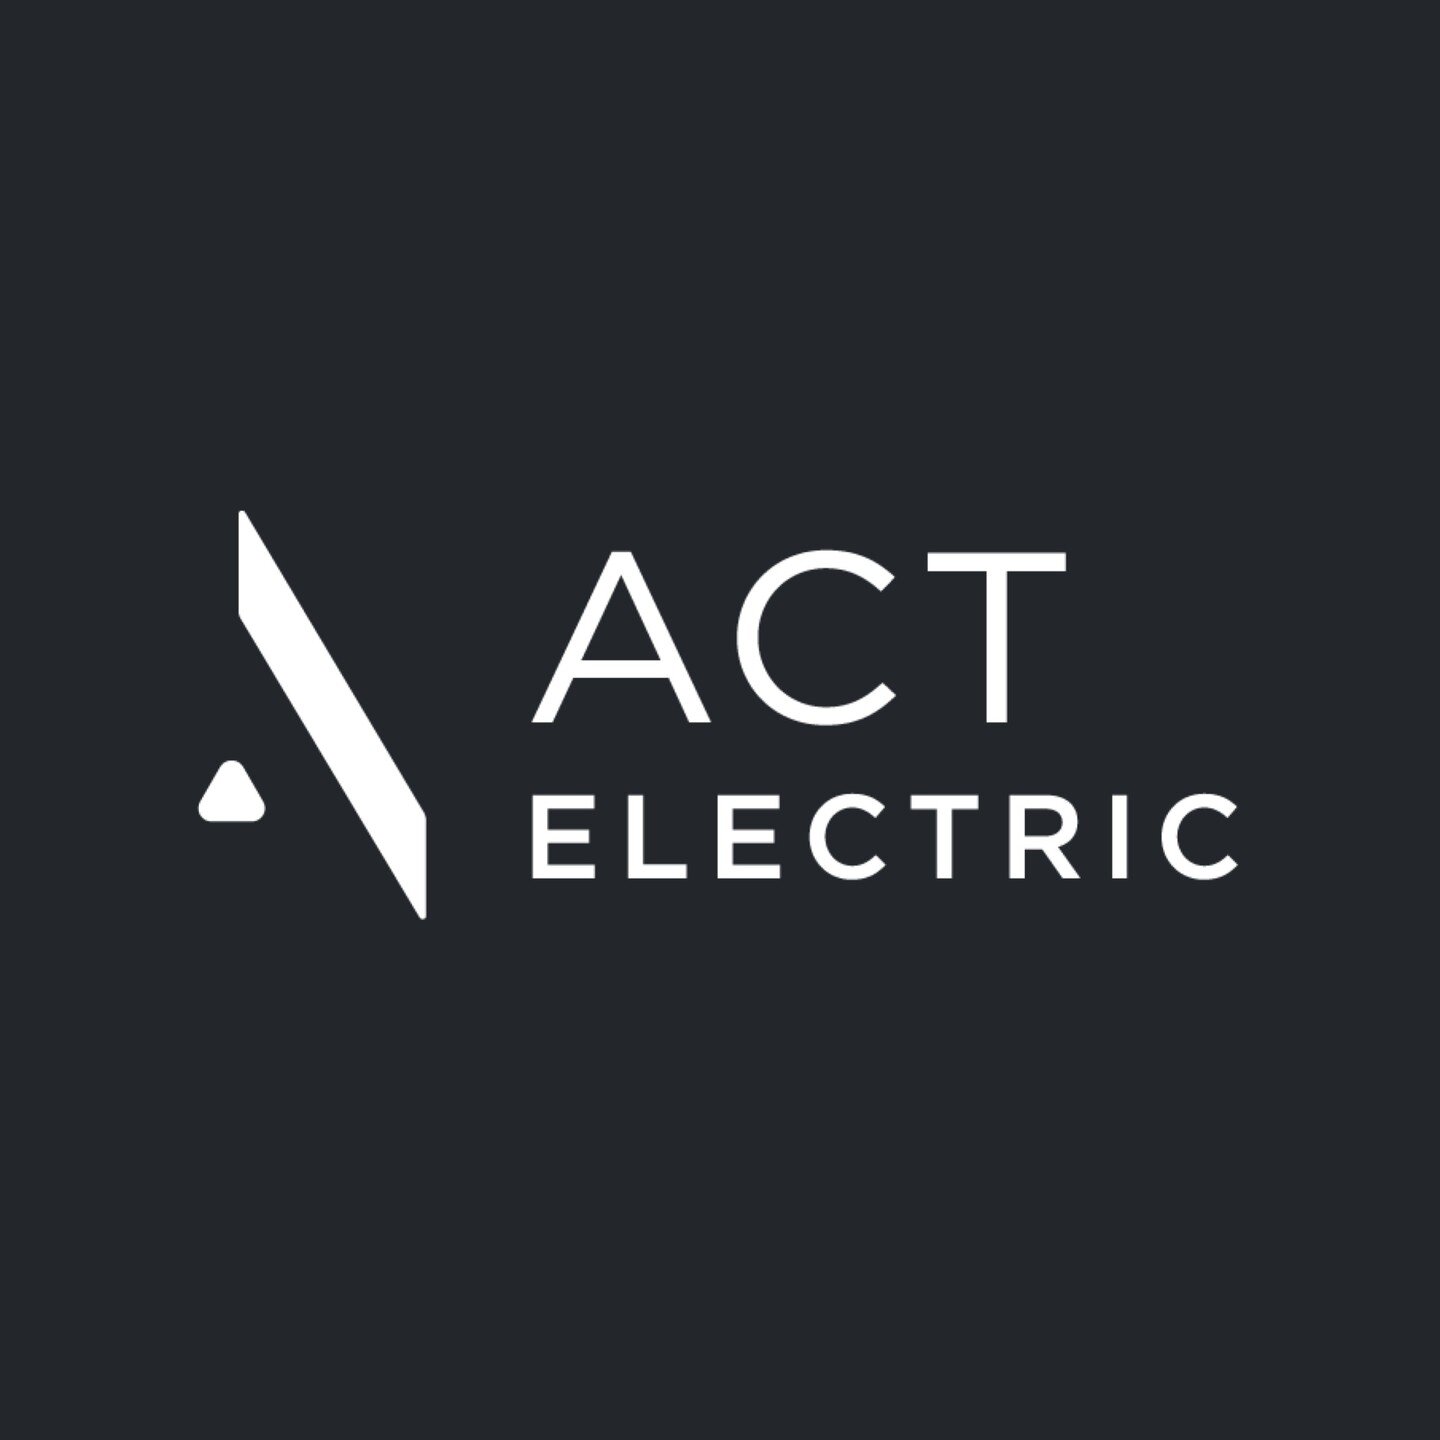 We are proud to announce ACT Electric, a new branch of Atlantic Control Technologies! 

A natural extension of our lighting services, ACT Electric will bring the same care and attention to detail to their work that our team is known for.

We are thri